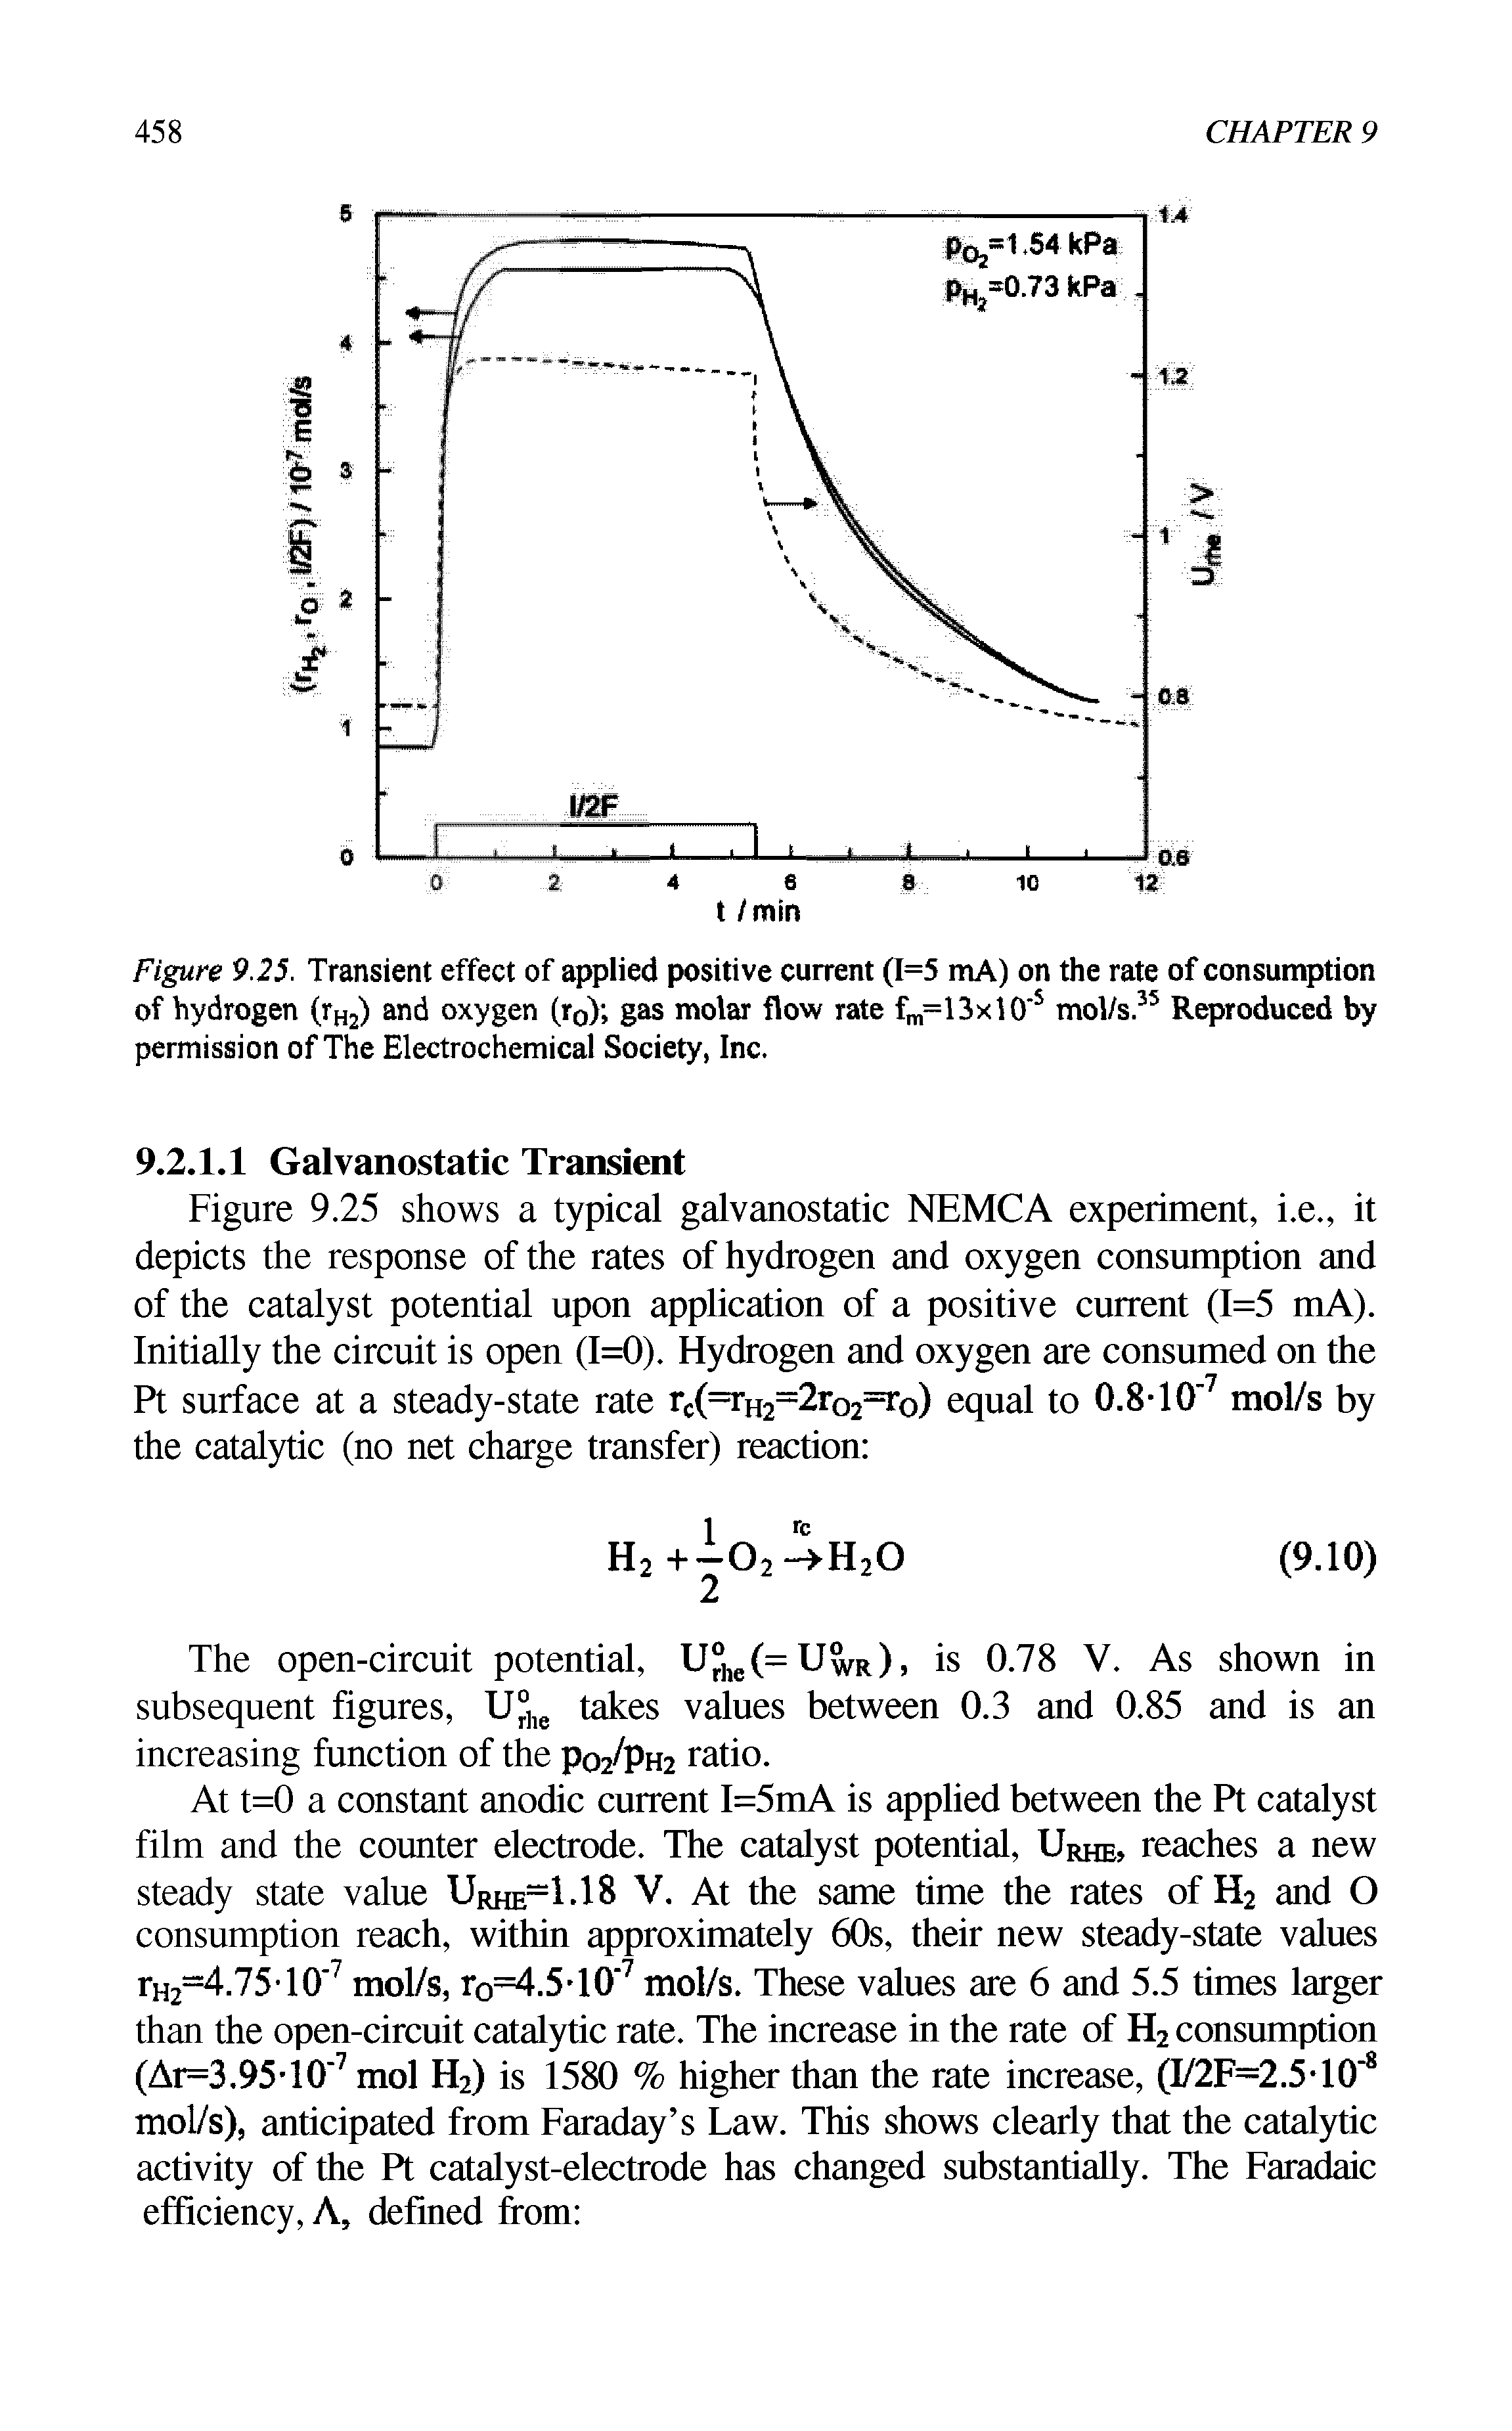 Figure 9.25. Transient effect of applied positive current (1=5 mA) on the rate of consumption of hydrogen (rH2) and oxygen (r0) gas molar flow rate fm=13x 0"s mol/s.35 Reproduced by permission of The Electrochemical Society, Inc.